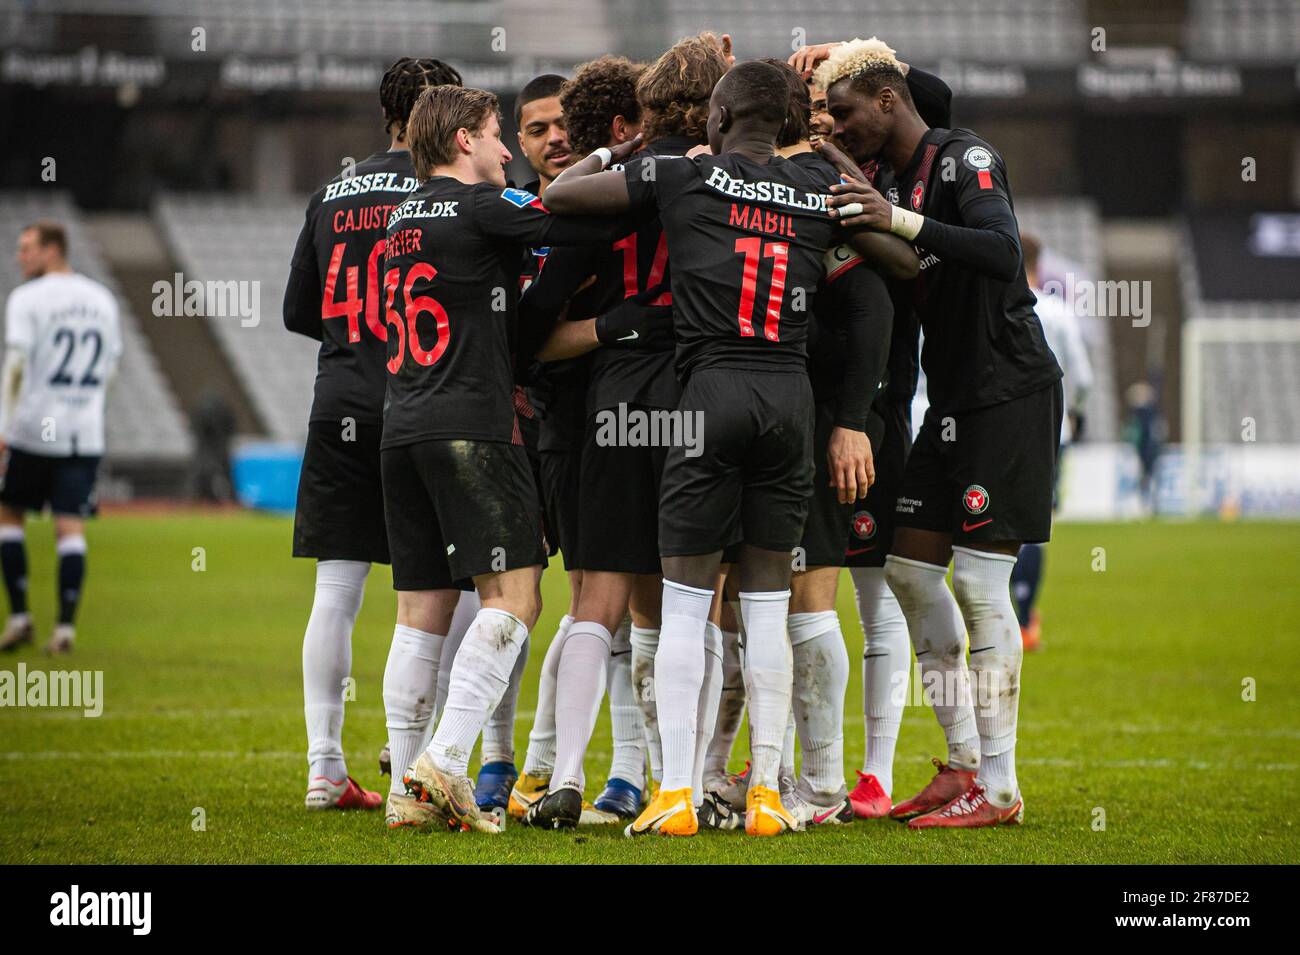 Aarhus Denmark 11th Apr 2021 Alexander Scholz 14 Of Fc Midtjylland Scores For 0 2 From The Penalty Spot And Celebrates With The Team During The 3f Superliga Match Between Aarhus Gf And